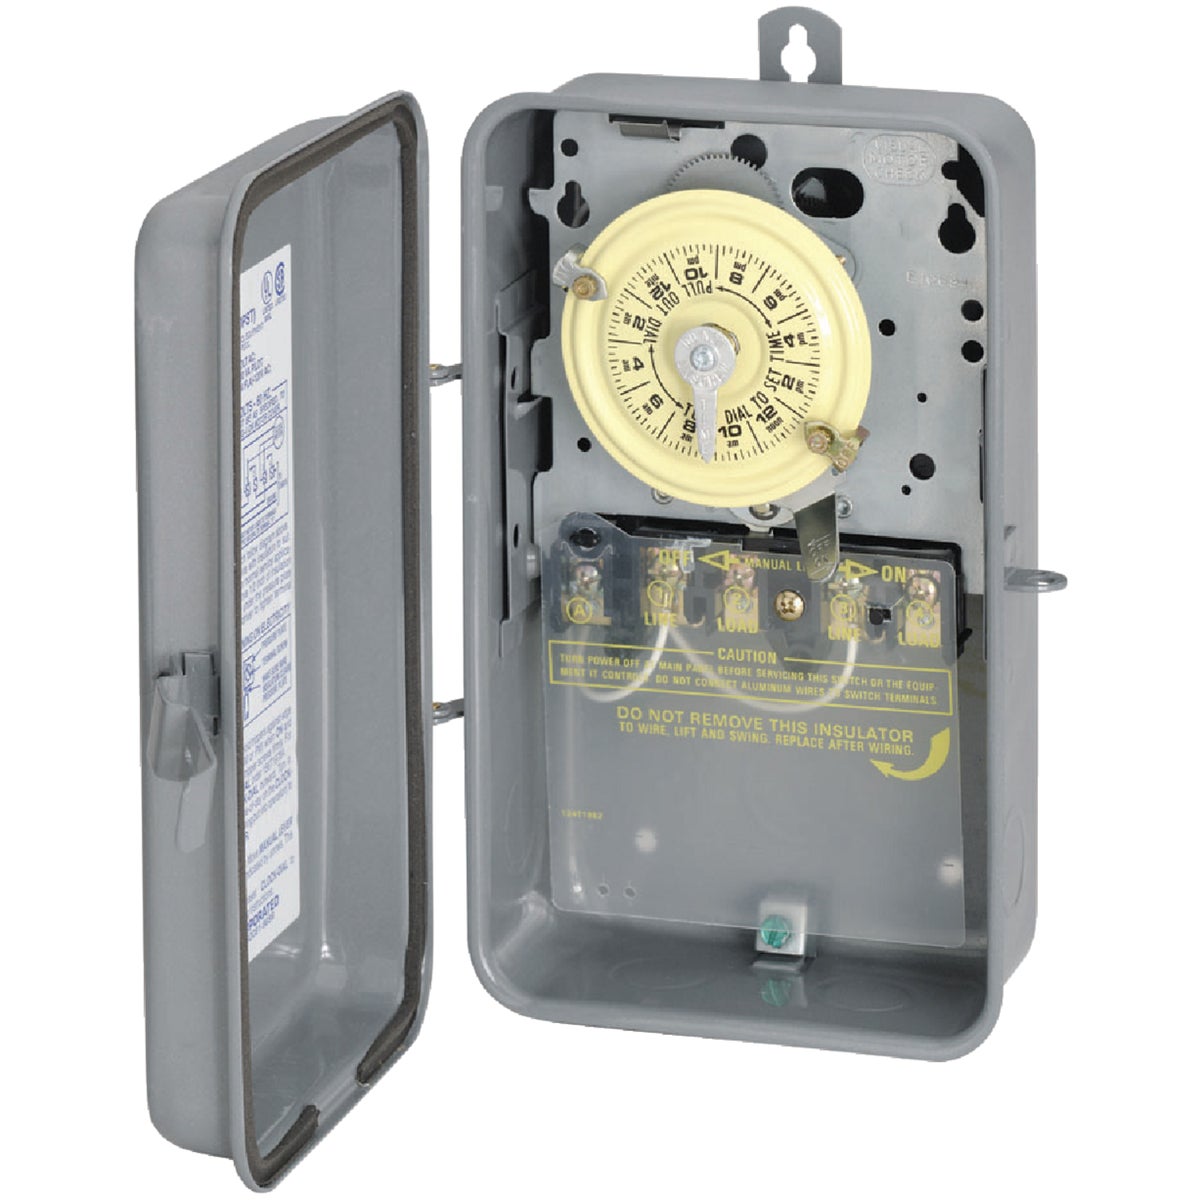 Item 500266, Mechanical 277-volt time switch with a raintight enclosure.